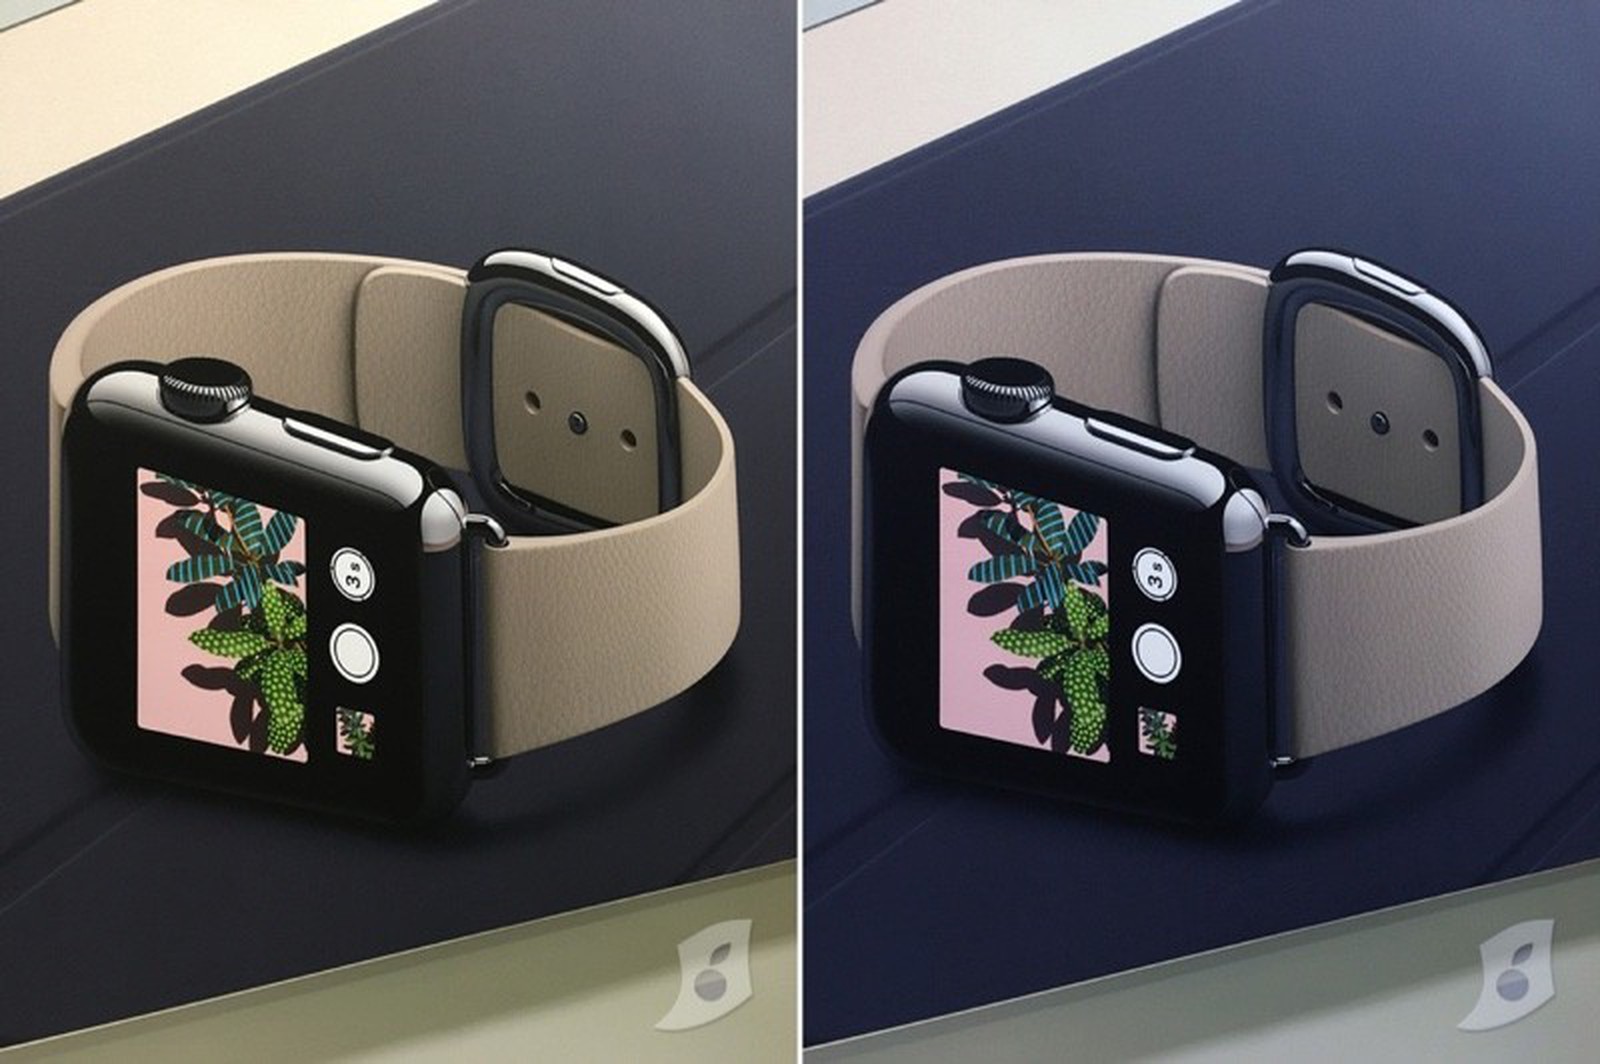 Photos of New 'Sand-Colored' Apple Watch Band are Just Poor Lighting - MacRumors